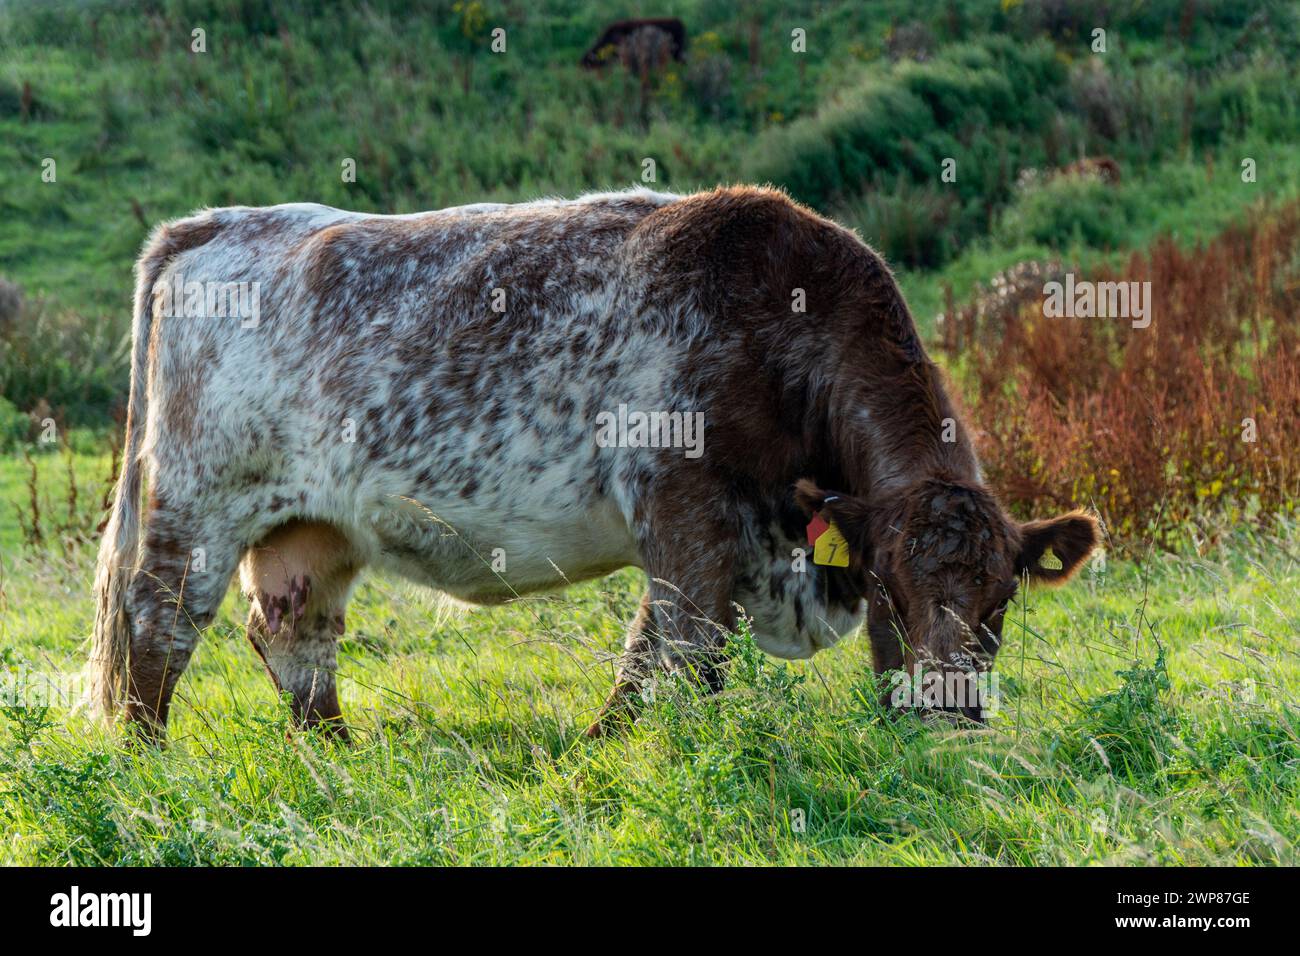 A brown cow grazing in a grassy field Stock Photo